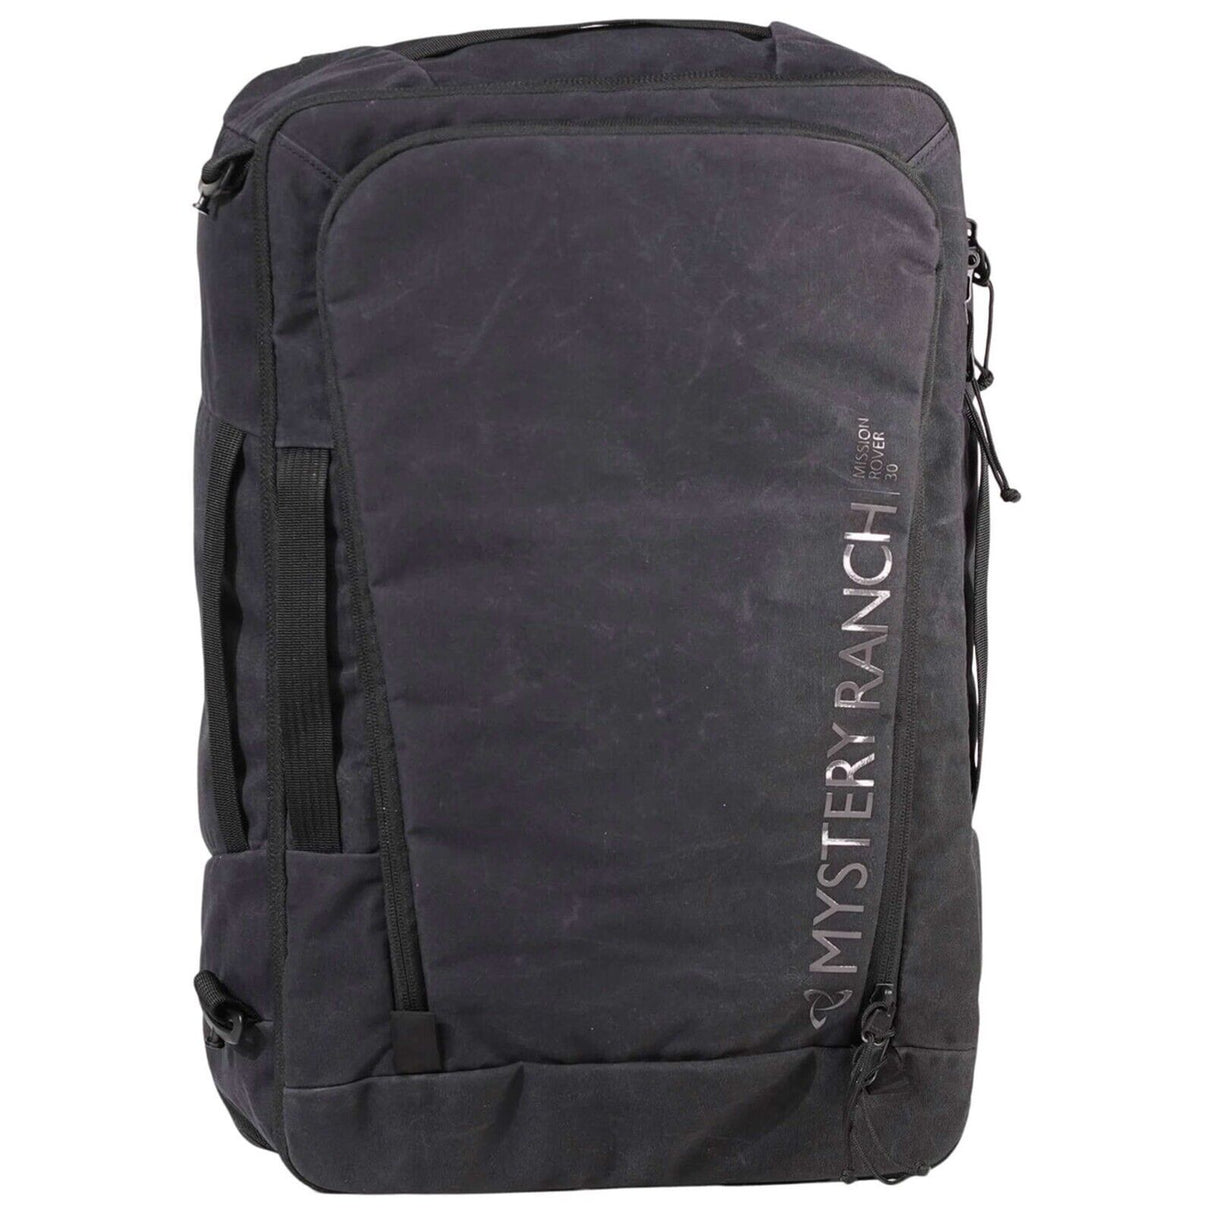 Mystery Ranch Unisex Mission Rover 30 Backpack - Black - One Size - Sportandleisure.com